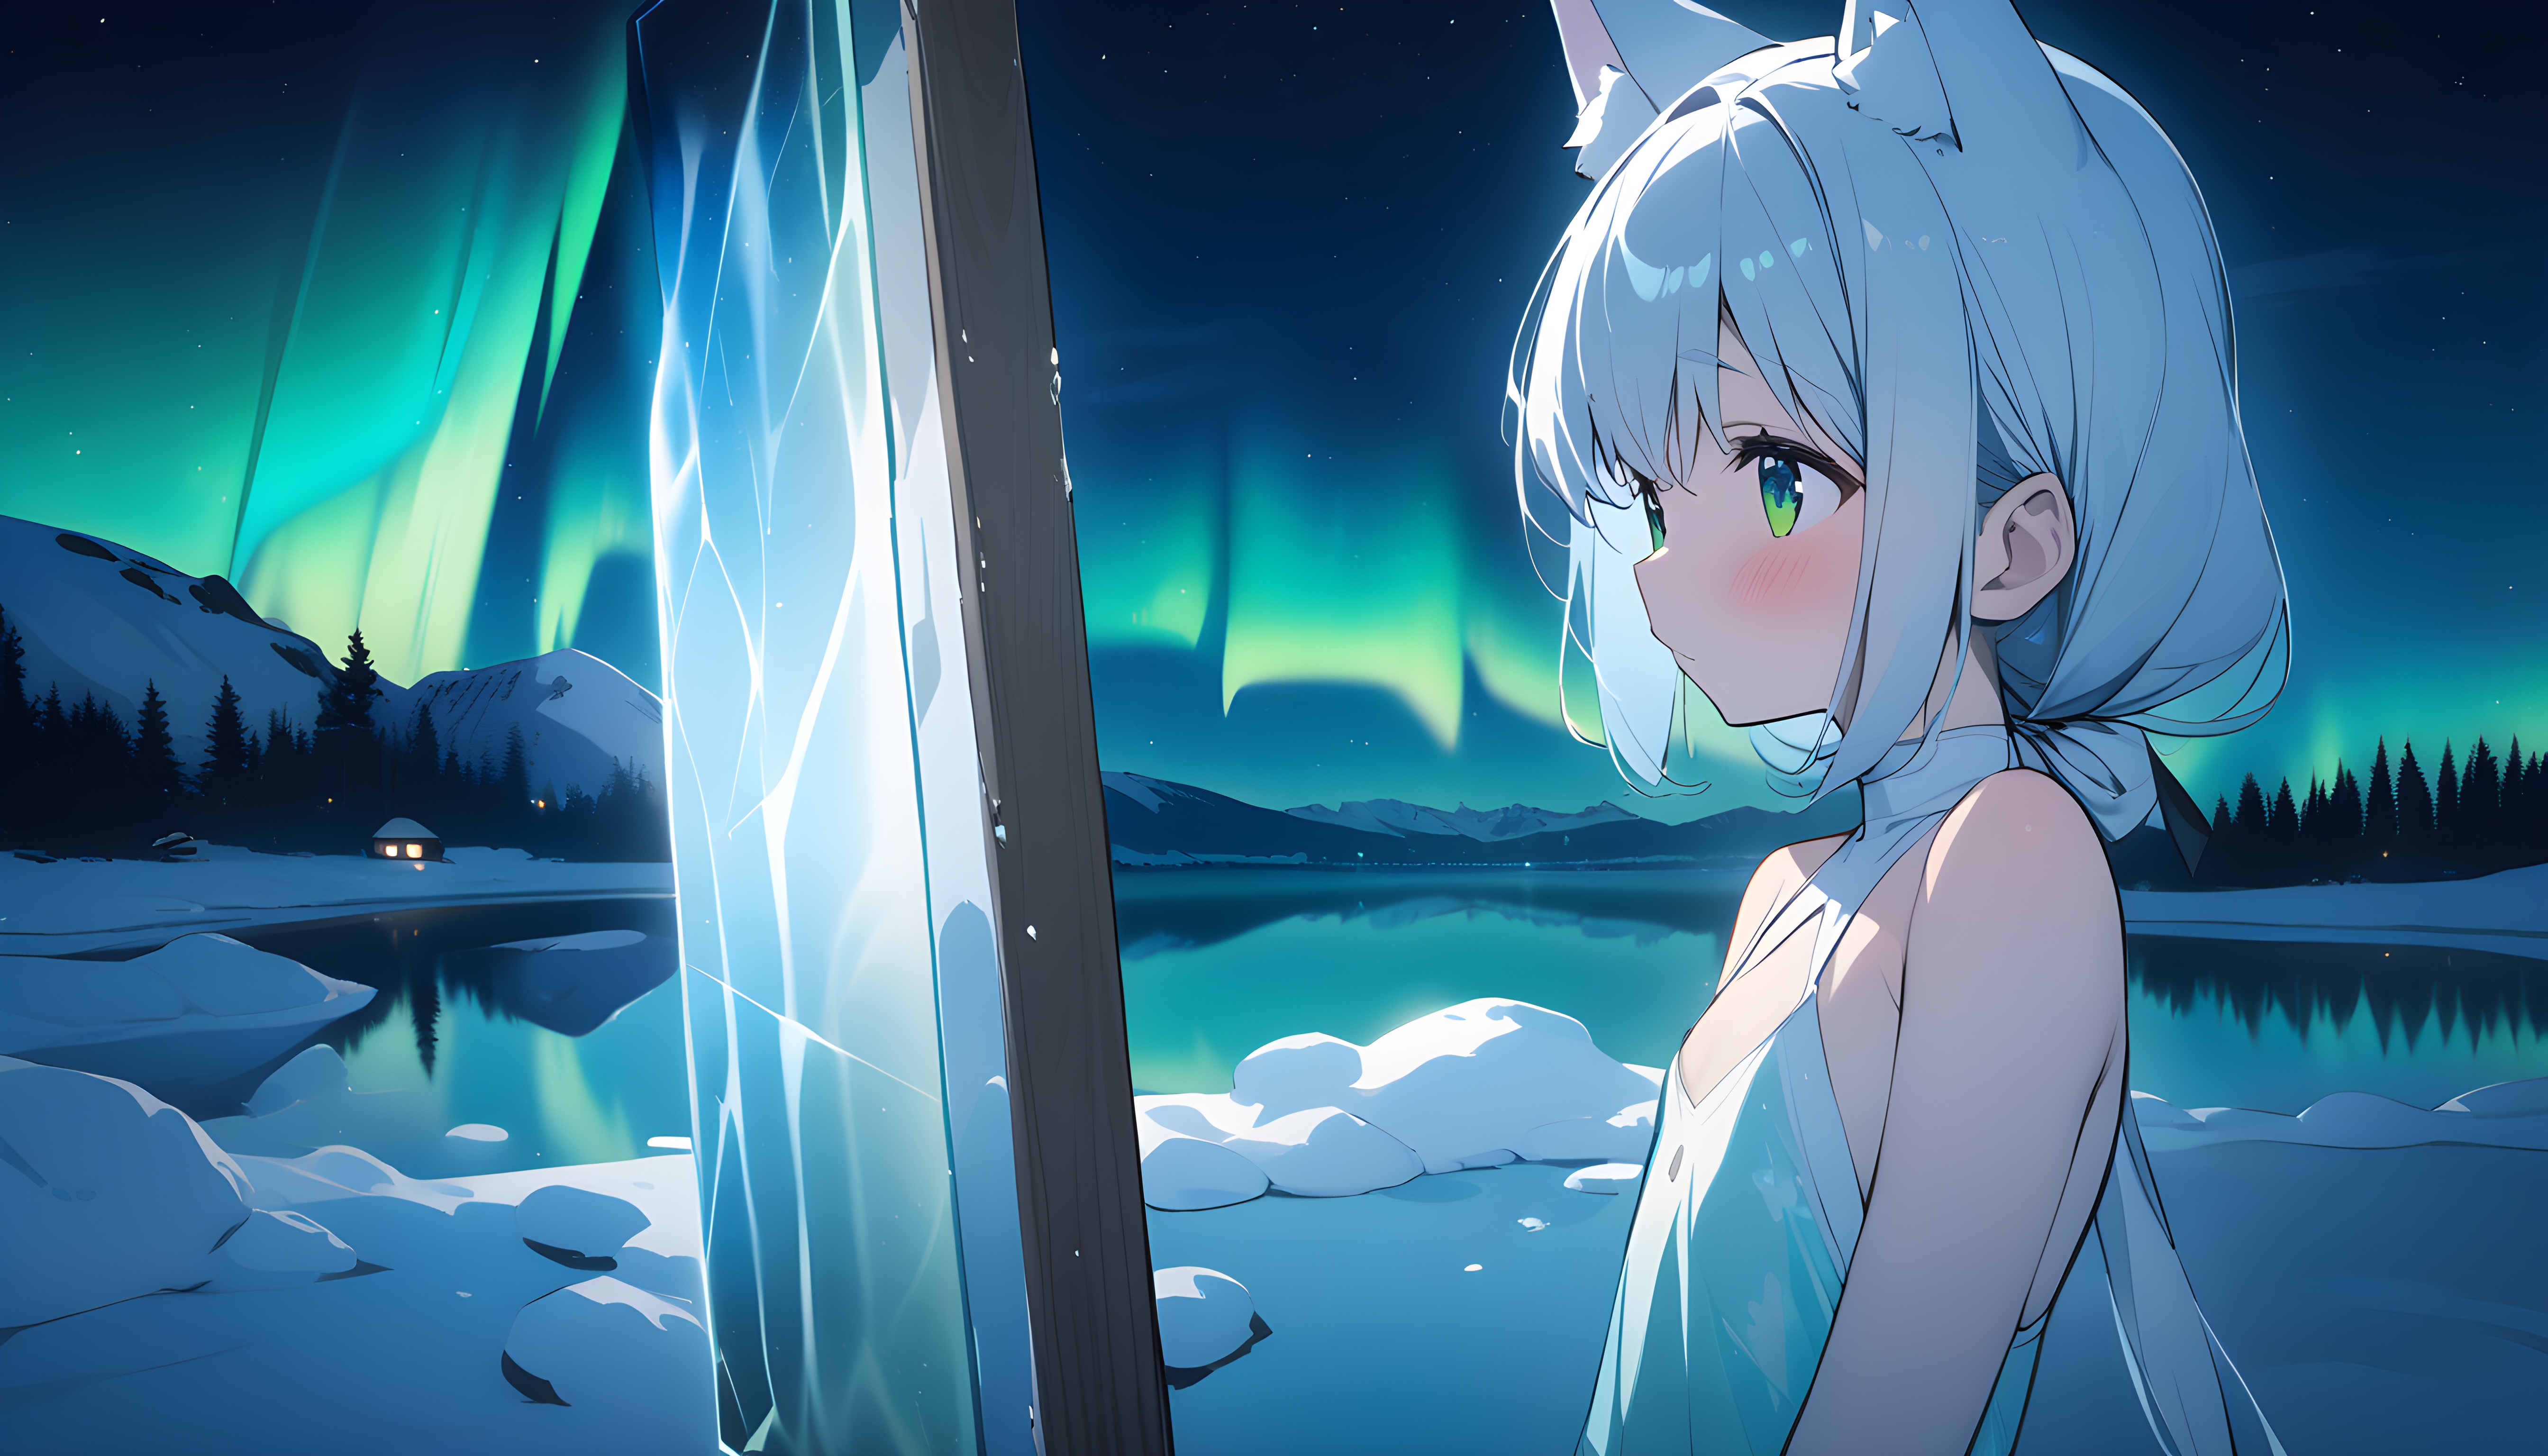 Anime 5376x3072 anime girls AI art cat girl green eyes mirror aurorae blushing long hair women outdoors night trees reflection sky water closed mouth small boobs cat ears